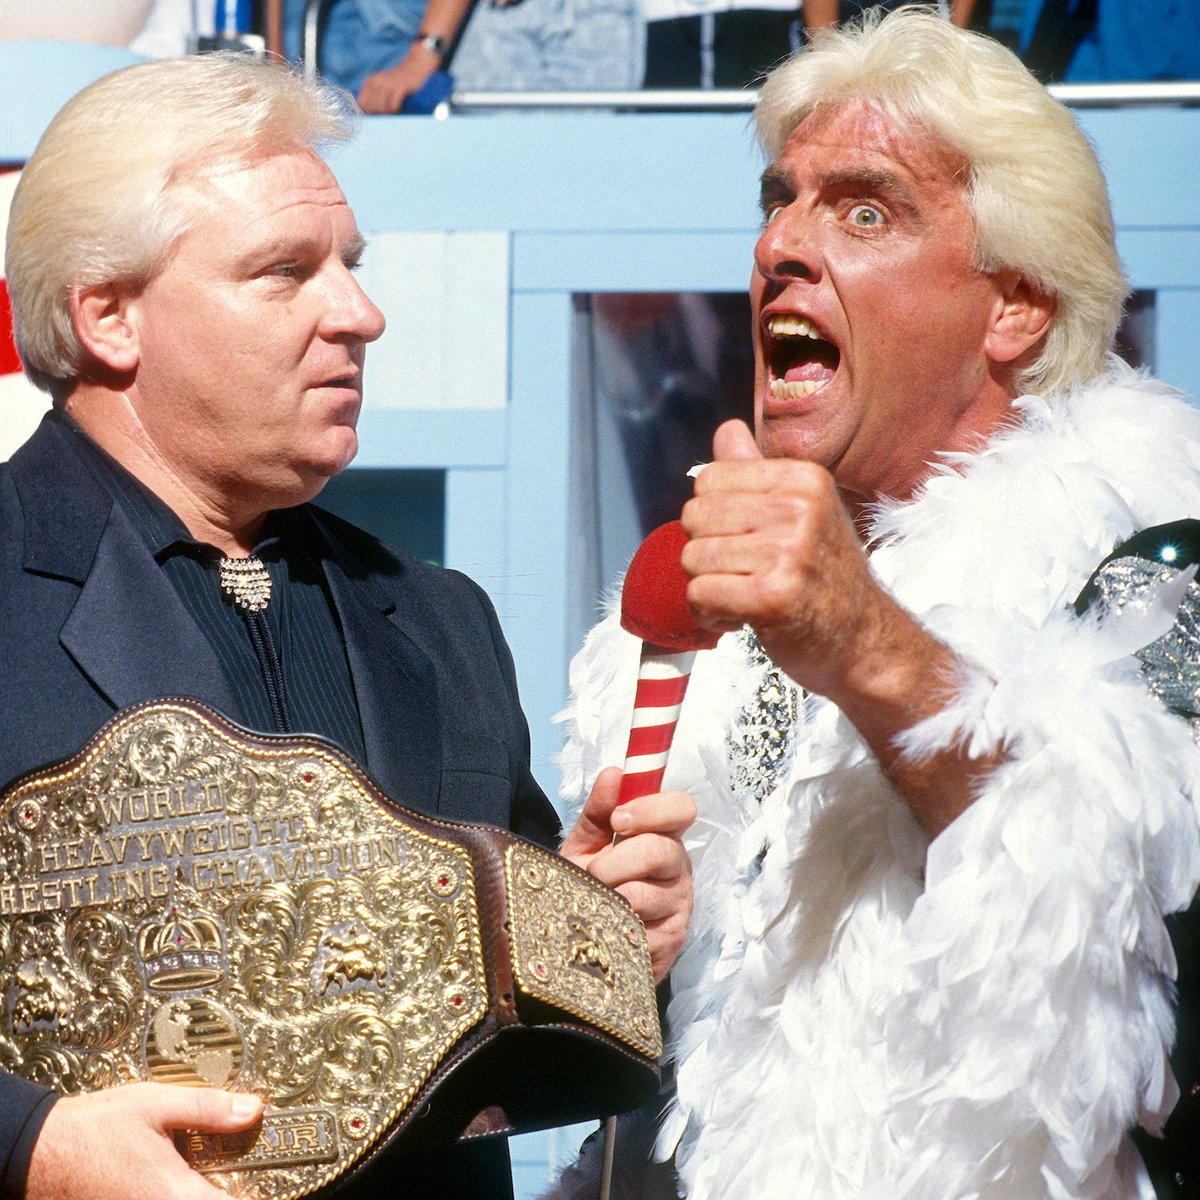 🎥 Federation Flashback! 'The Nature Boy' Ric Flair arrives in the WWF armed with the World Heavyweight Championship belt! Wooooo! September 9, 1991. #WWF #WWE #Wrestling #BobbyHeenan #RicFlair